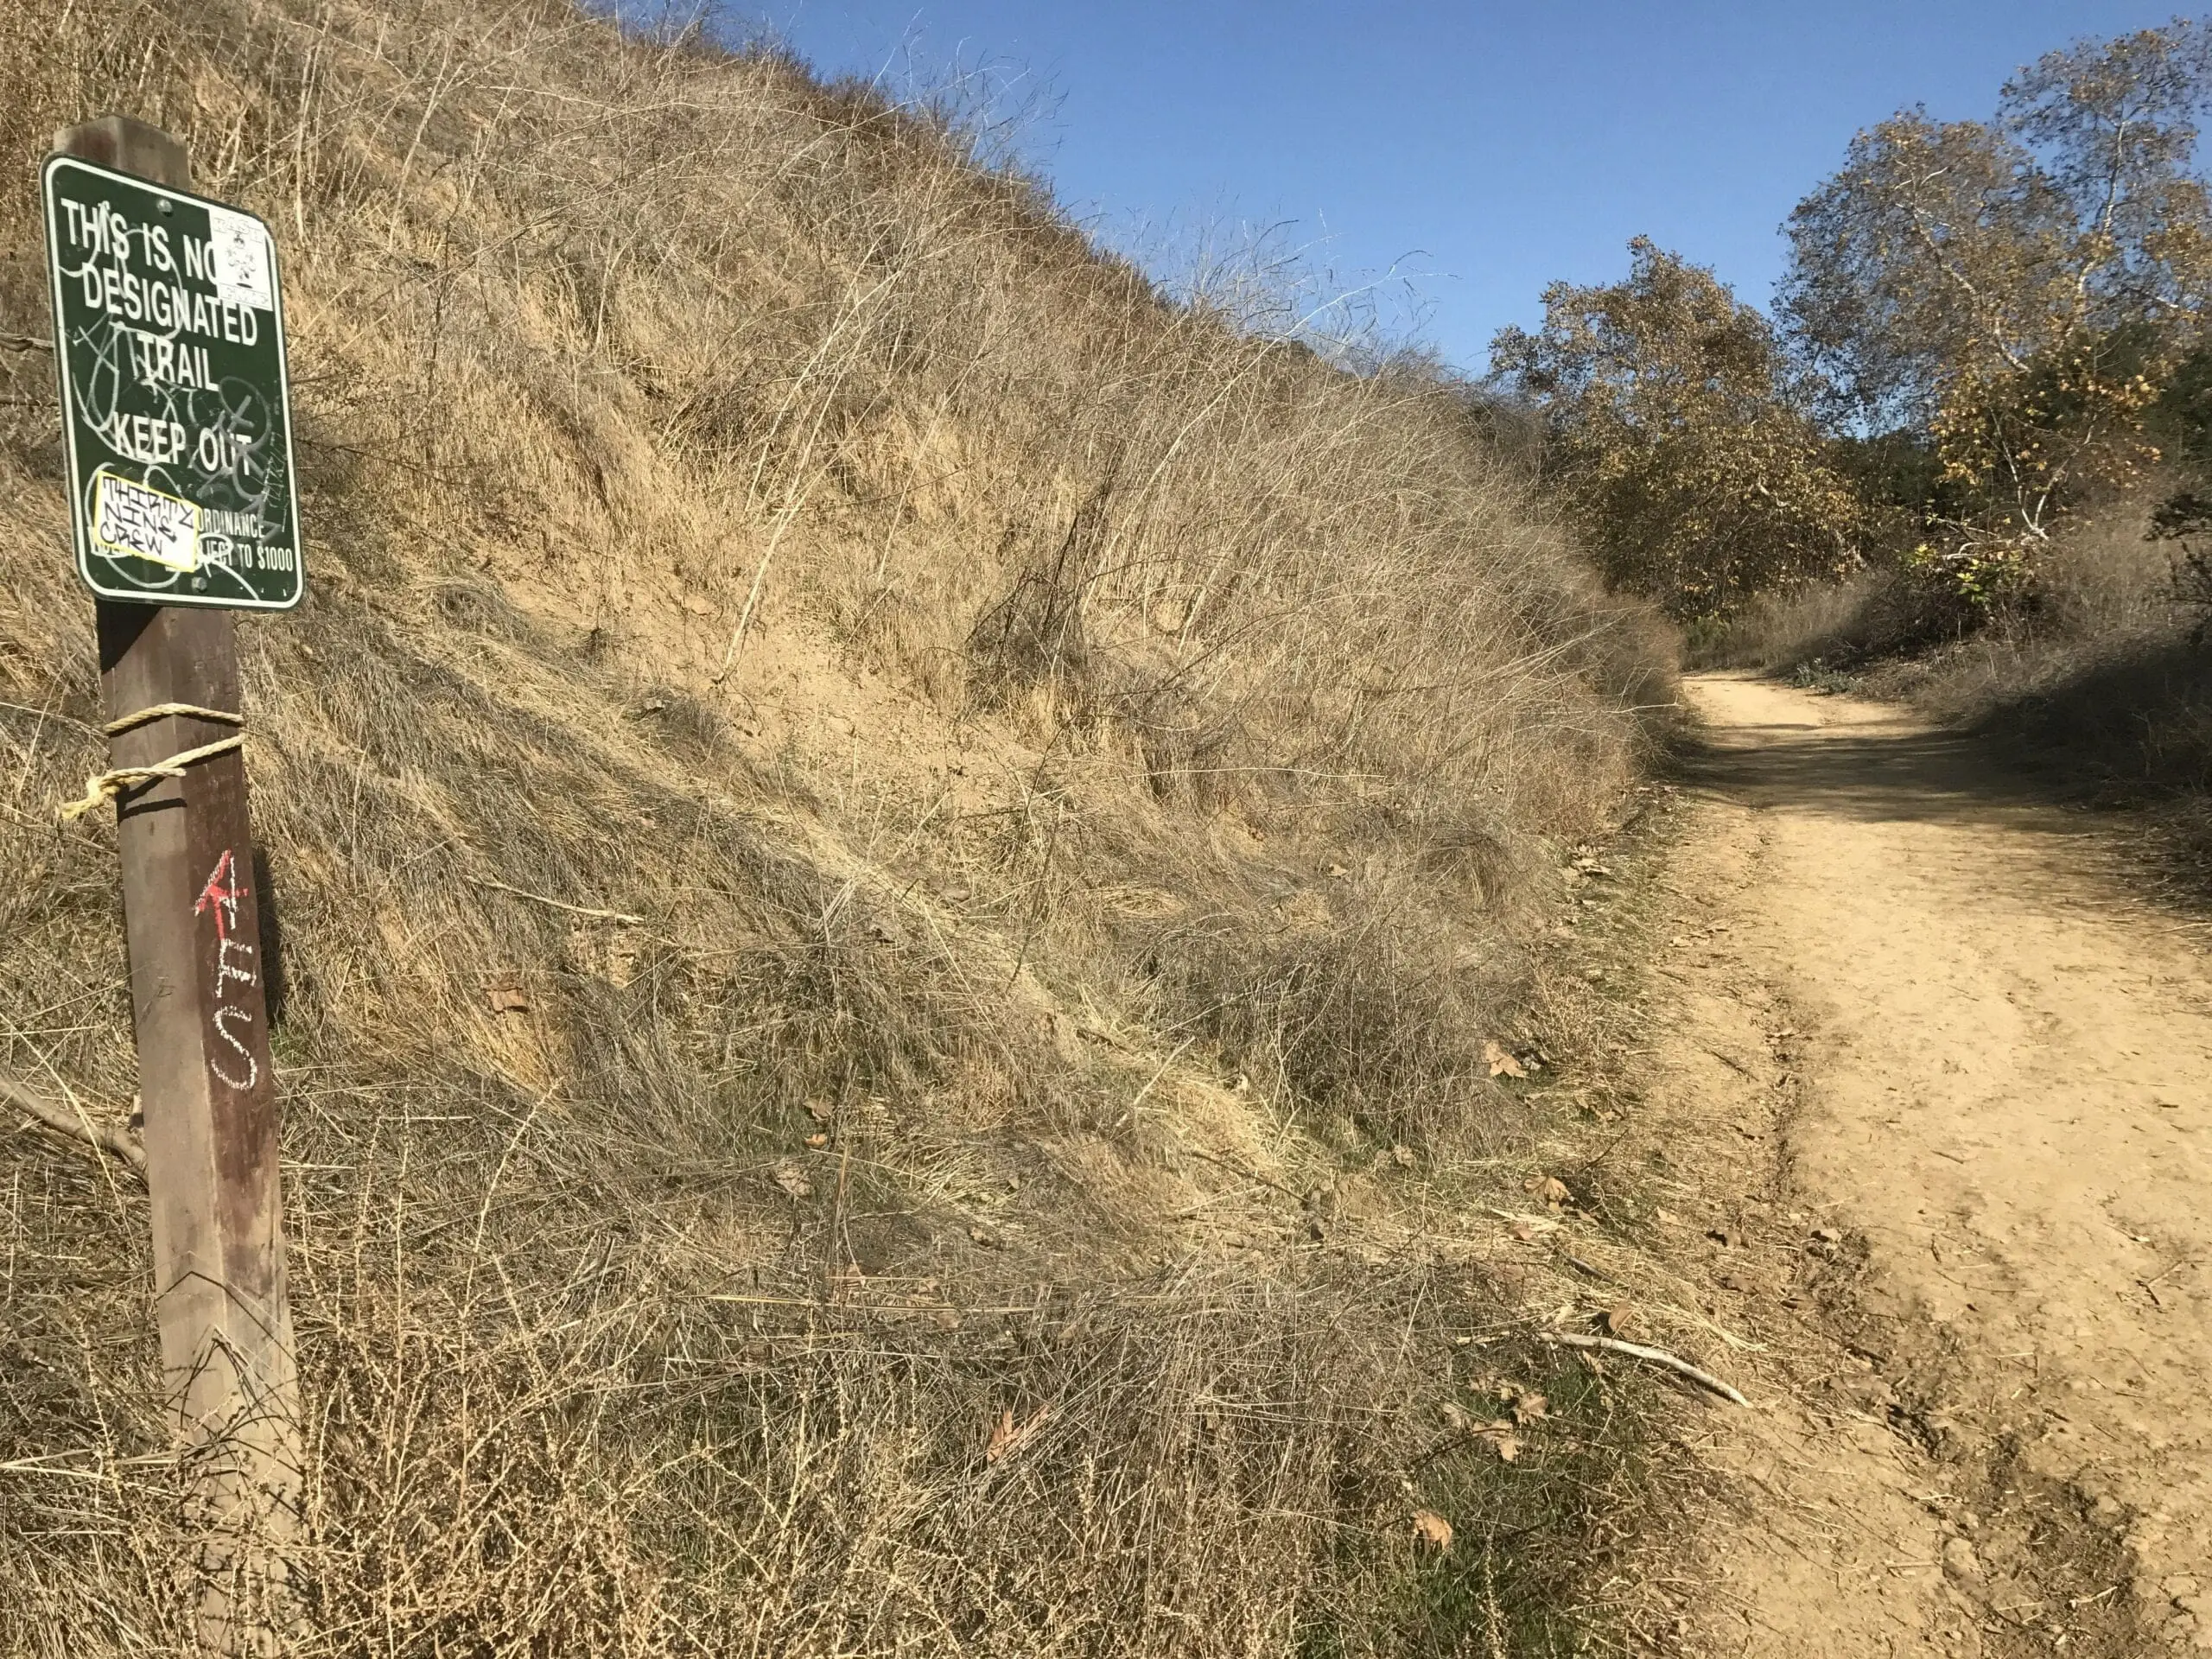 Turnbull Canyon Trail marker, keep on main trail sign